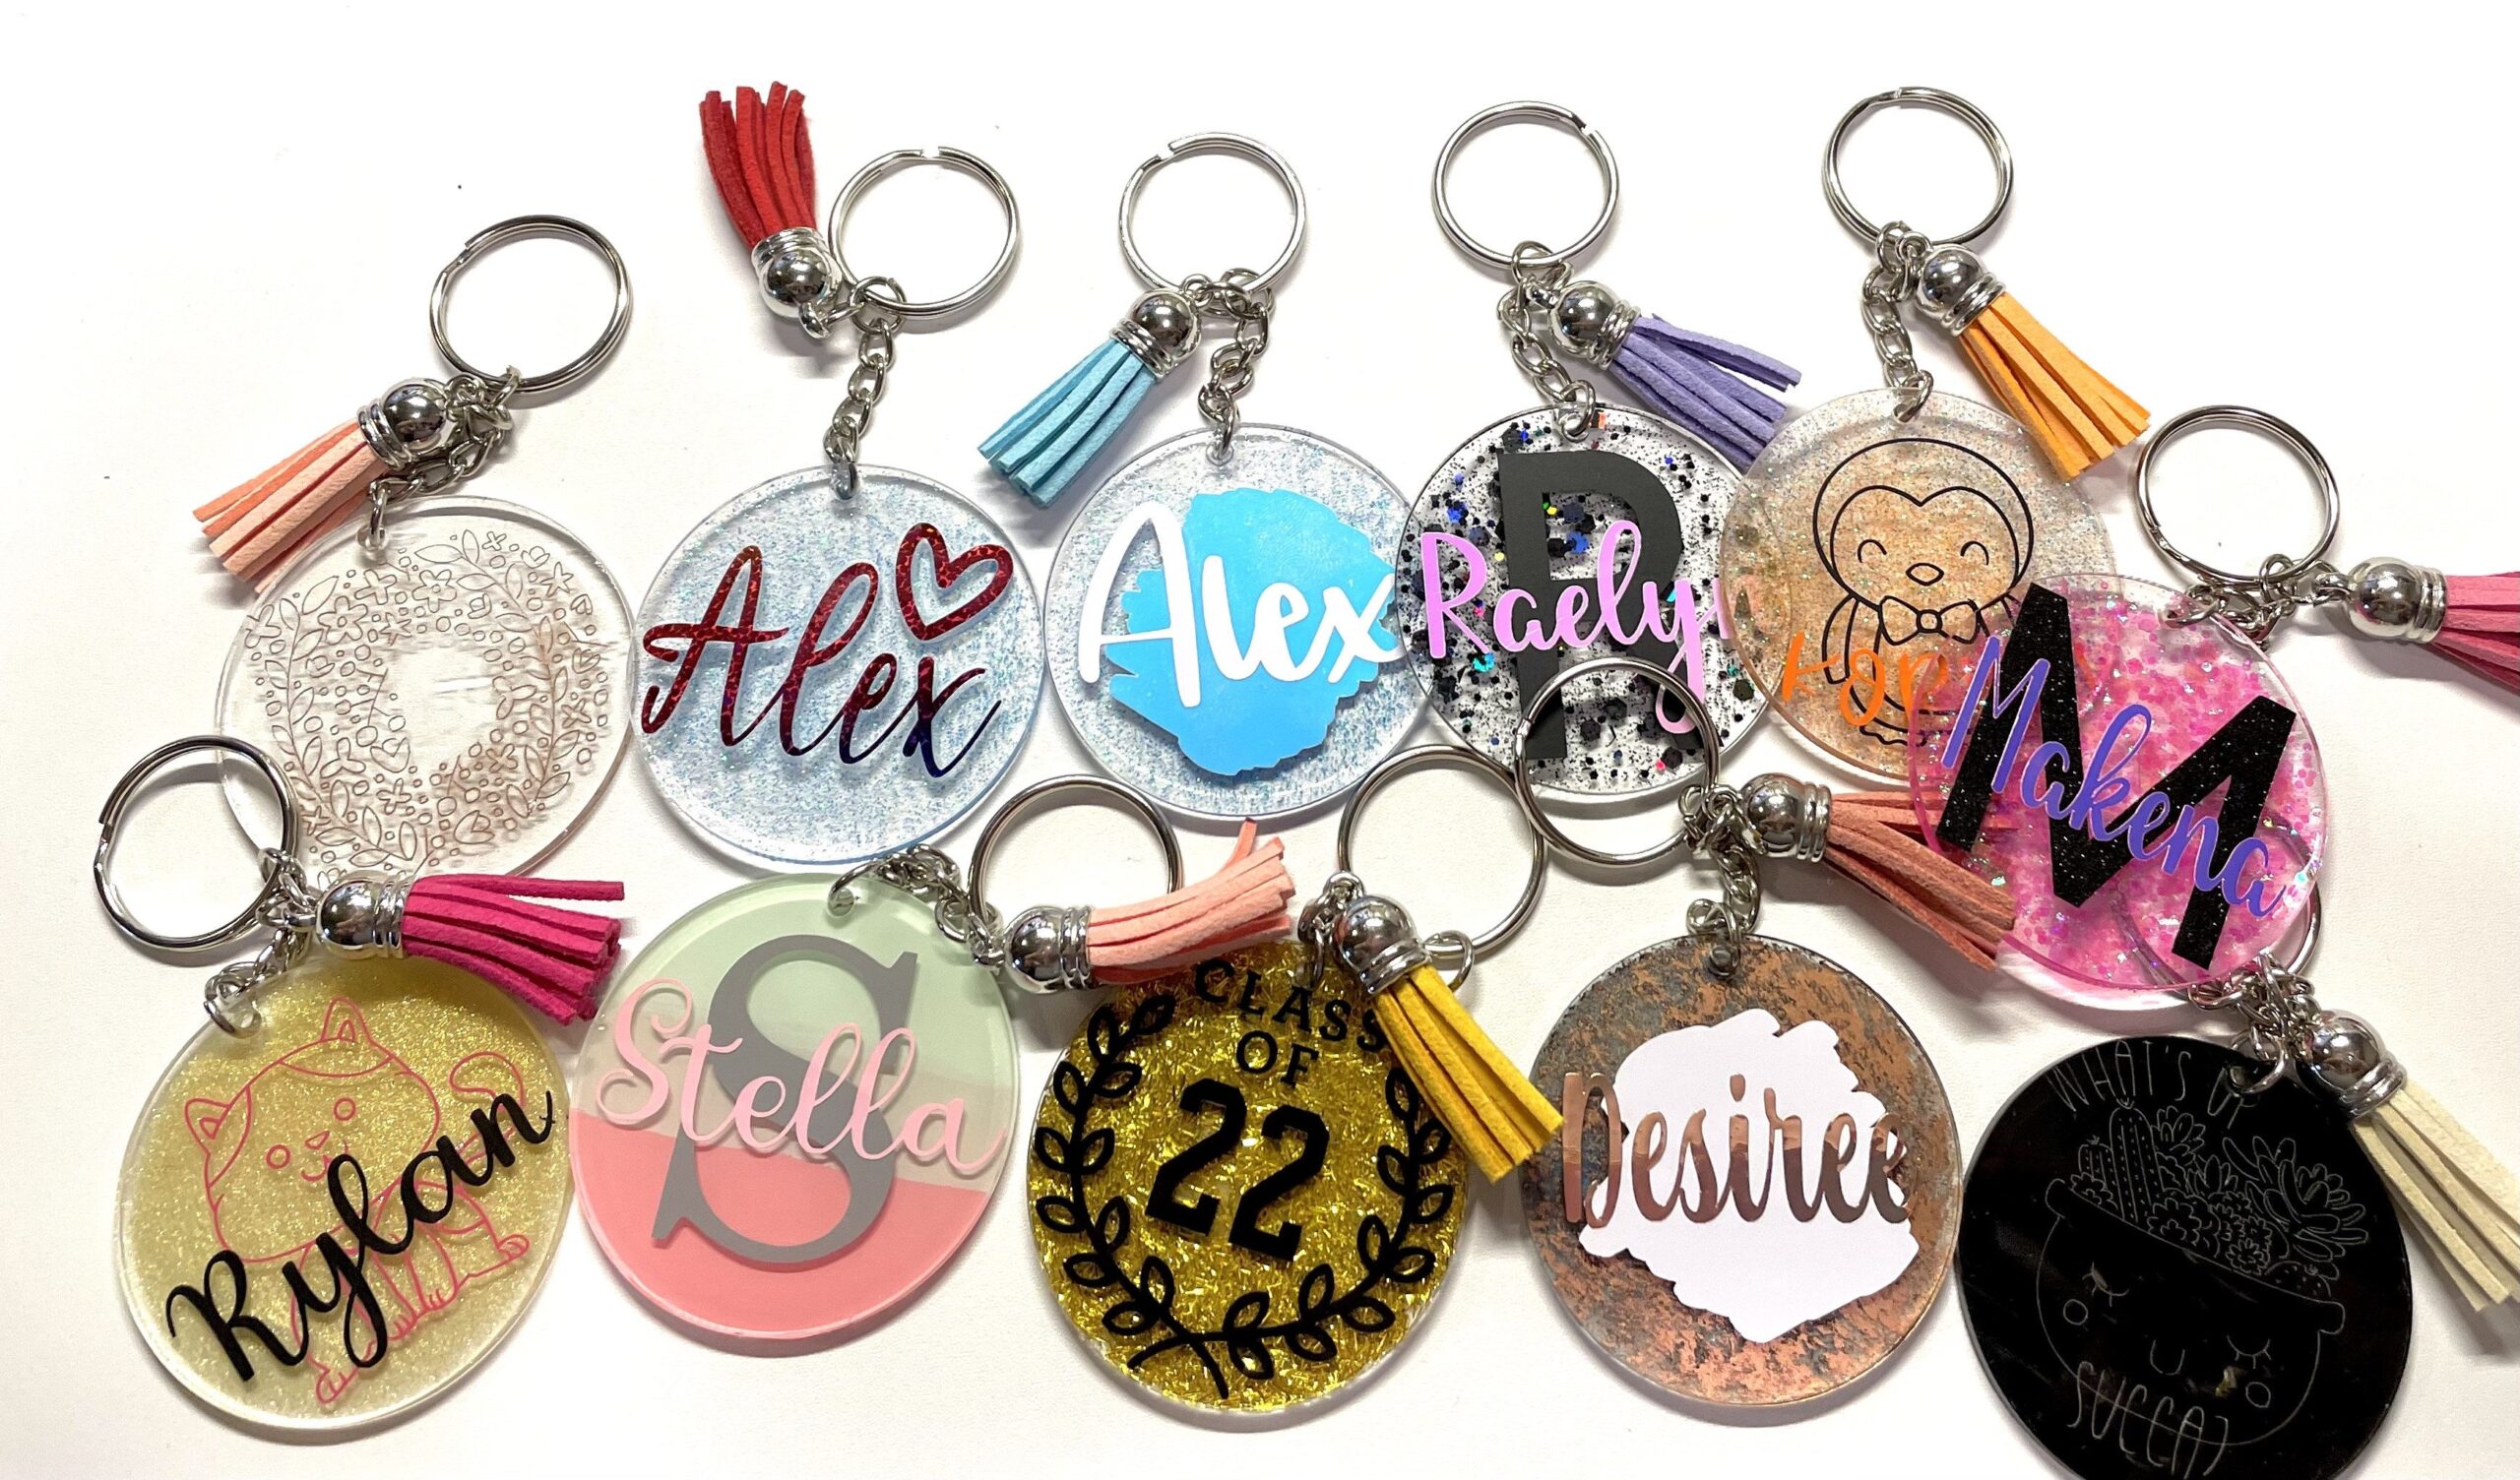 Get Creative with These Fun Ideas for Decorating Your Acrylic Keychain Collection